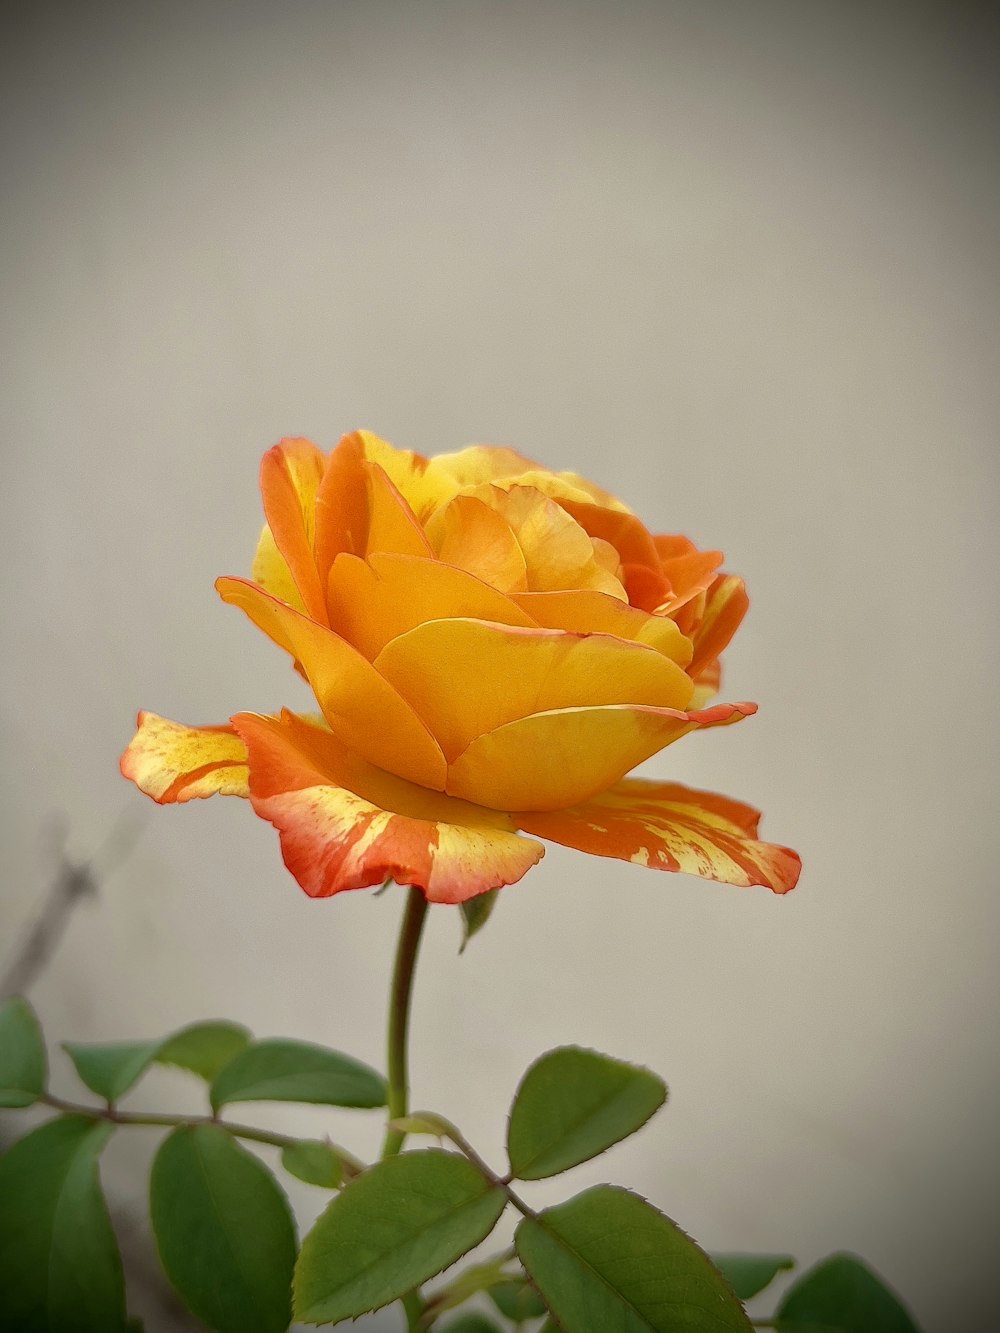 a yellow and orange rose with green leaves